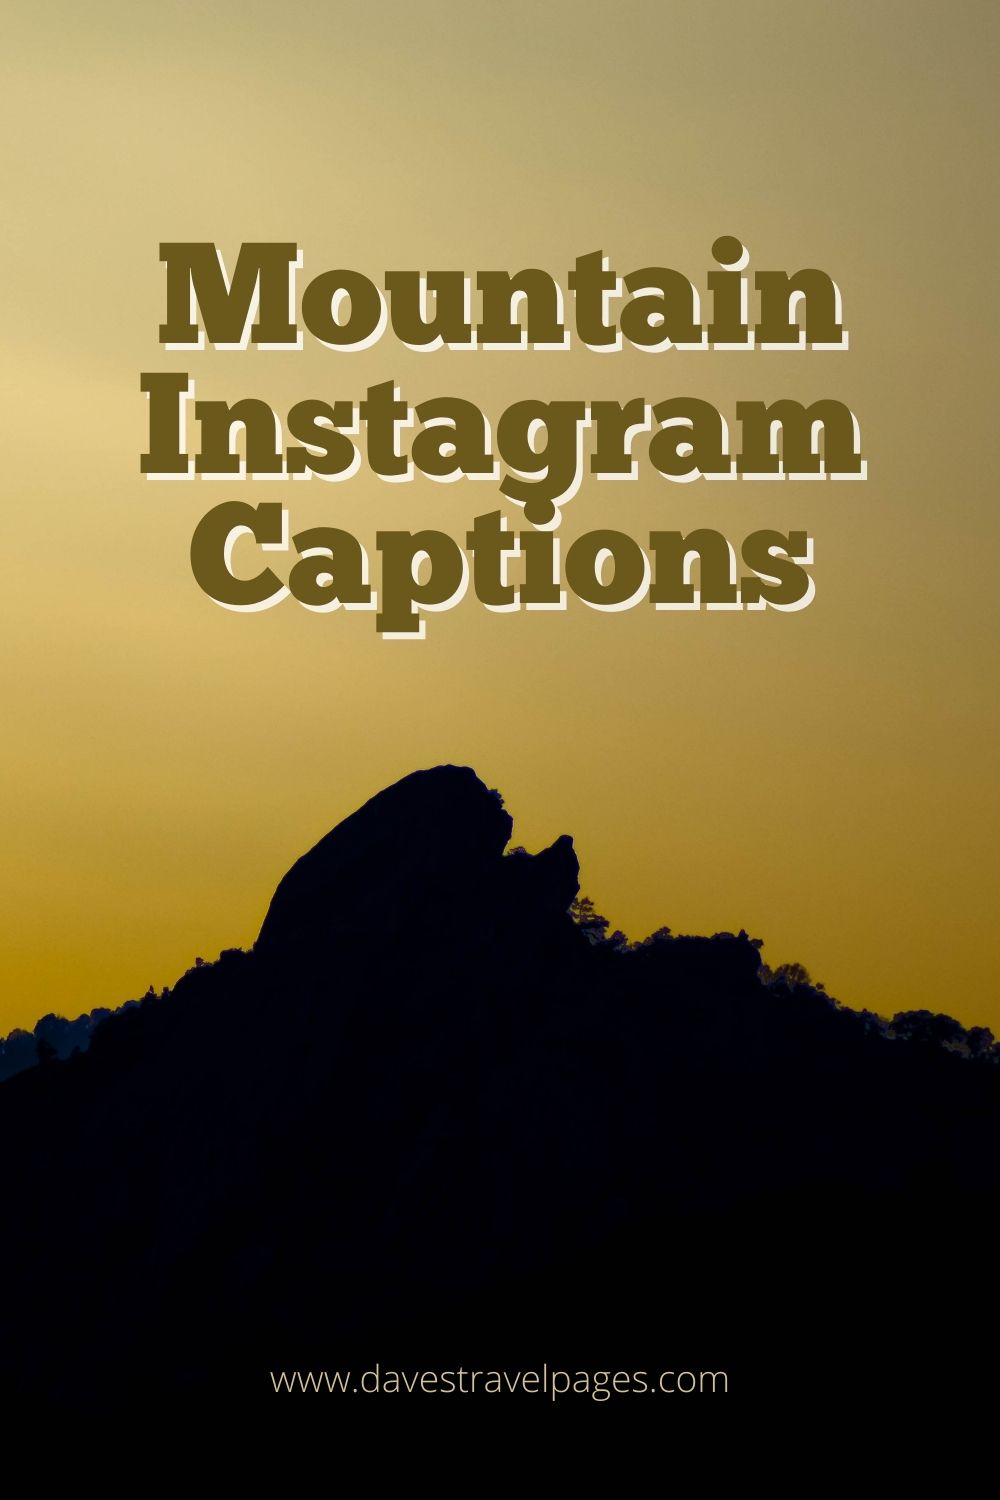 Captions About Mountains to use for Instagram